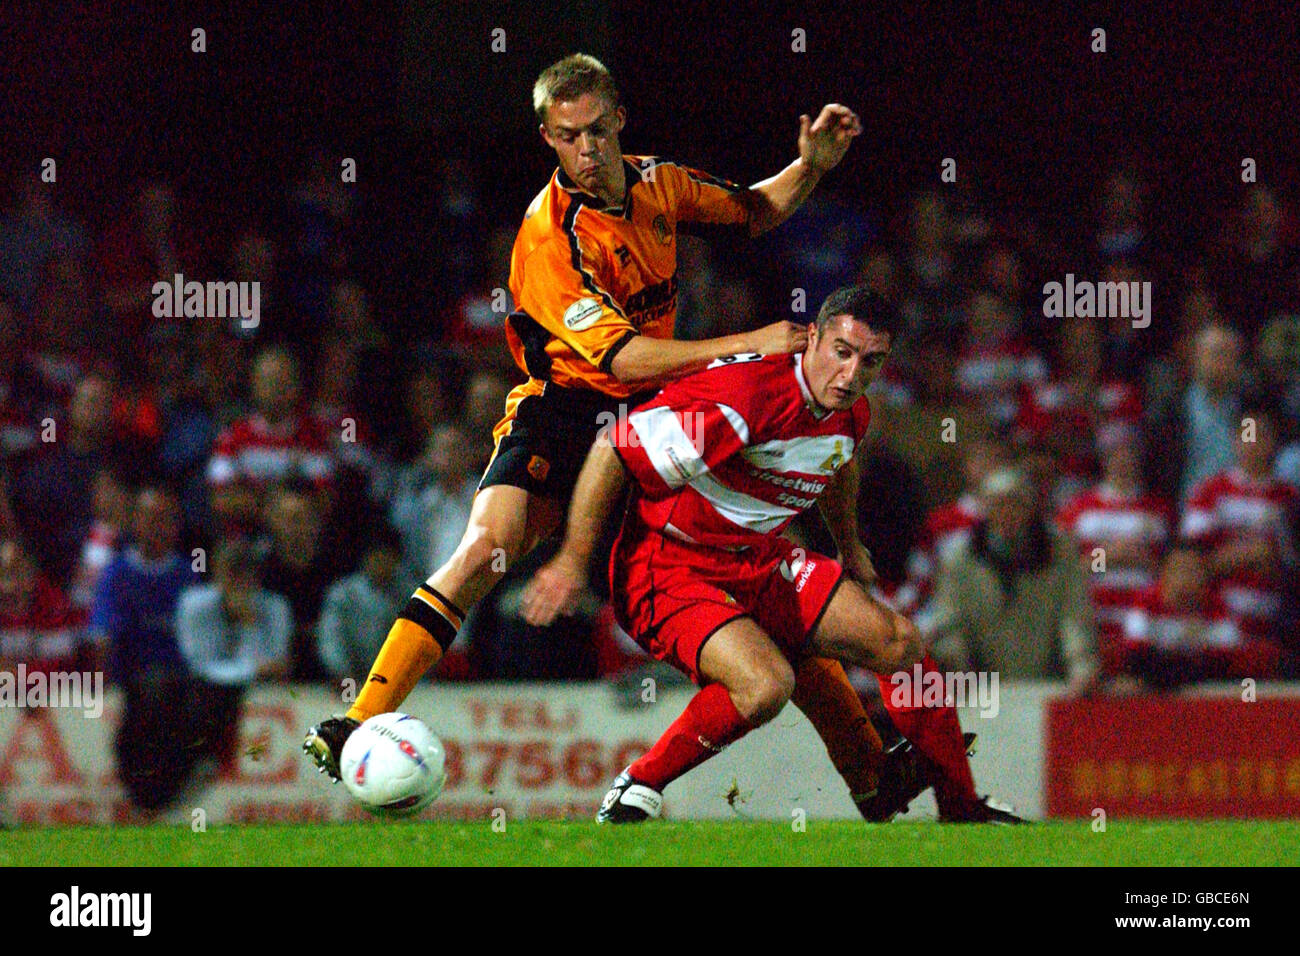 Soccer - Nationwide League Division Three - Doncaster Rover v Hull City. Hull City's Danny Allsopp (l) challenges Doncaster Rover's Simon Marples (r) from behind Stock Photo